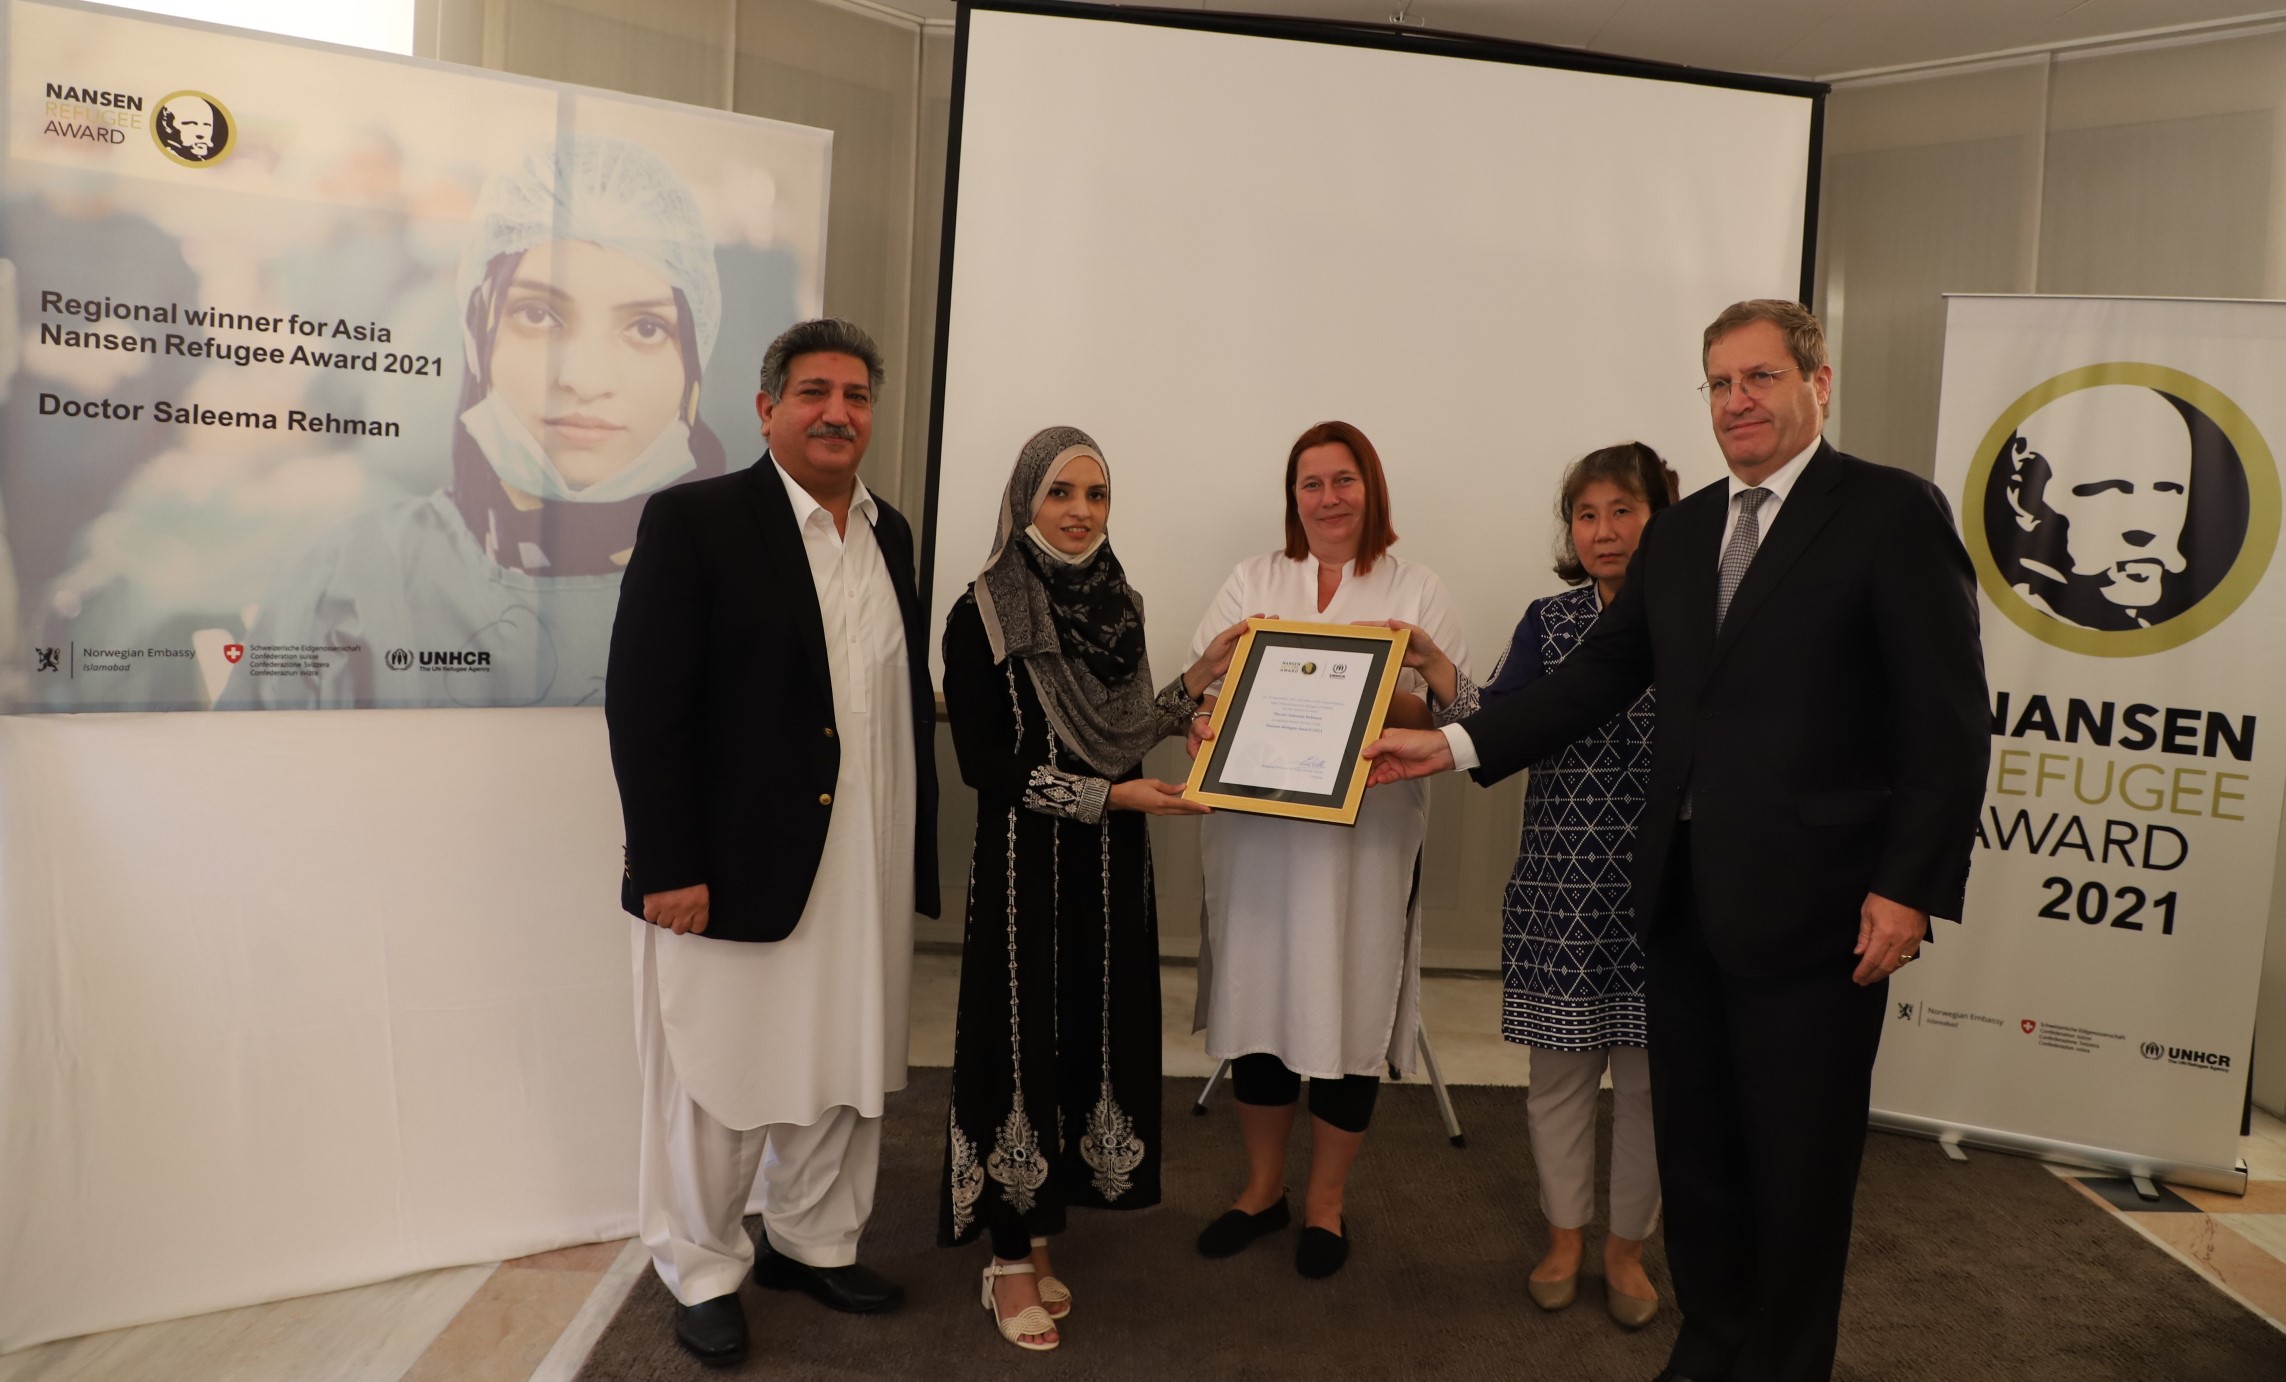 The Ambassador of Switzerland, Bénédict de Cerjat, the UNHCR Representative, Noriko Yoshida, the Chargée d’affaires of Norway, Elin Kylvåg, and the Chief Commissioner for Afghan Refugees, Saleem Khan, presenting an award certificate to the regional winner for Asia of the Nansen Refugee Award, Dr. Saleema Rehman, at the event in Islamabad. © UNHCR/Asif Shahzad